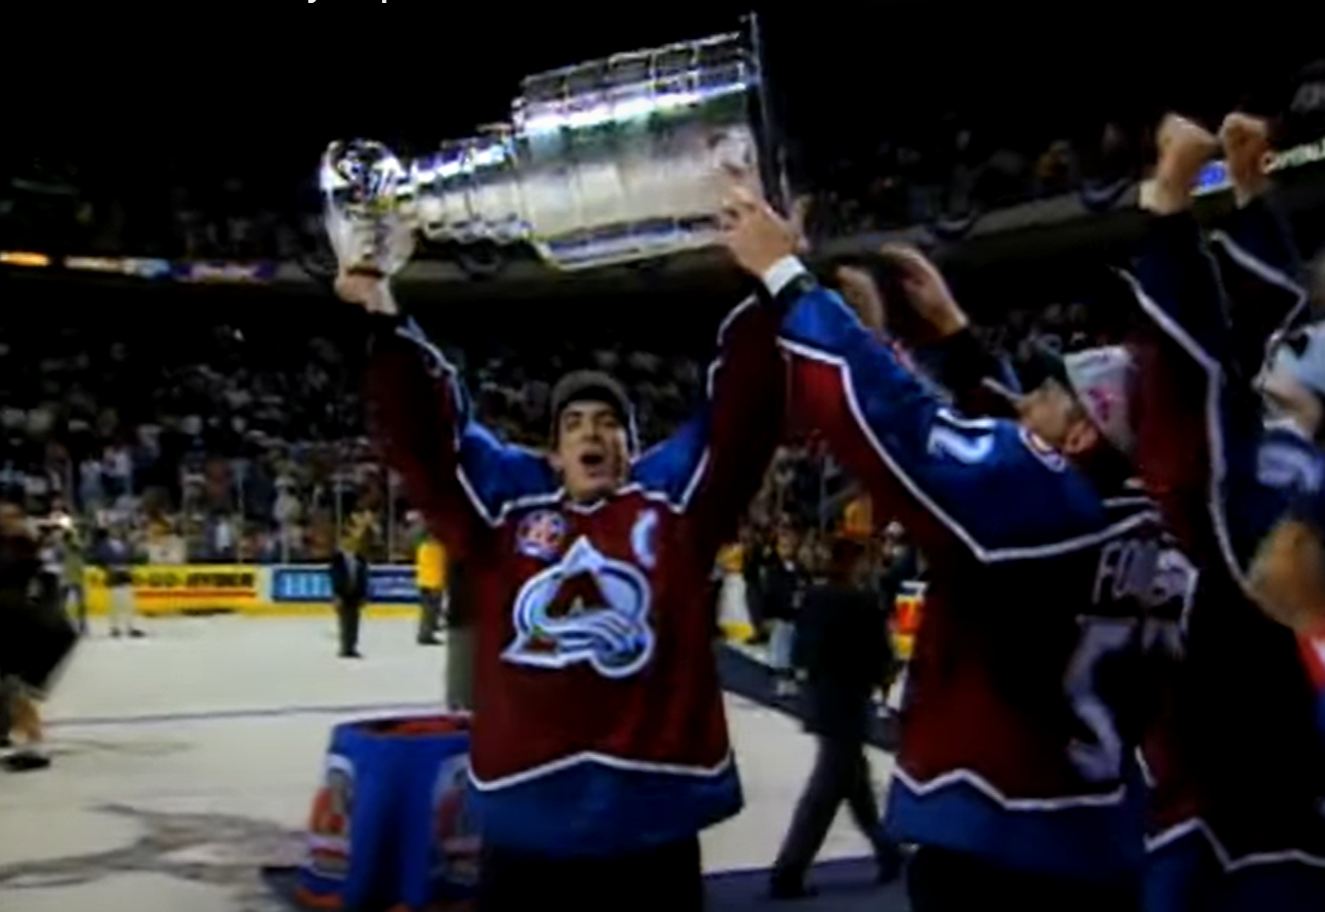 Colorado Avalanche 1996 2001 2022 Stanley Cup Champions We Are The